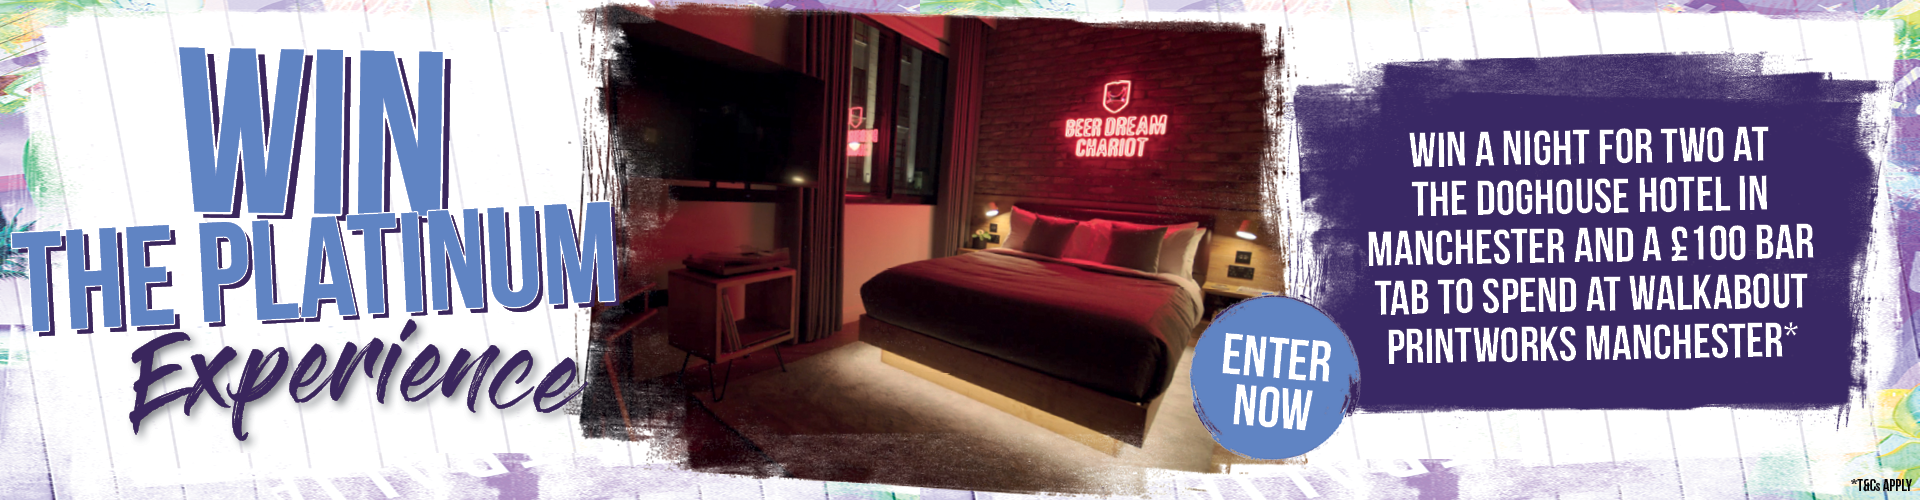 Win a night for two at the DogHouse hotel in Manchester and a £100 bar tab to spend at Walkabout Printworks Manchester